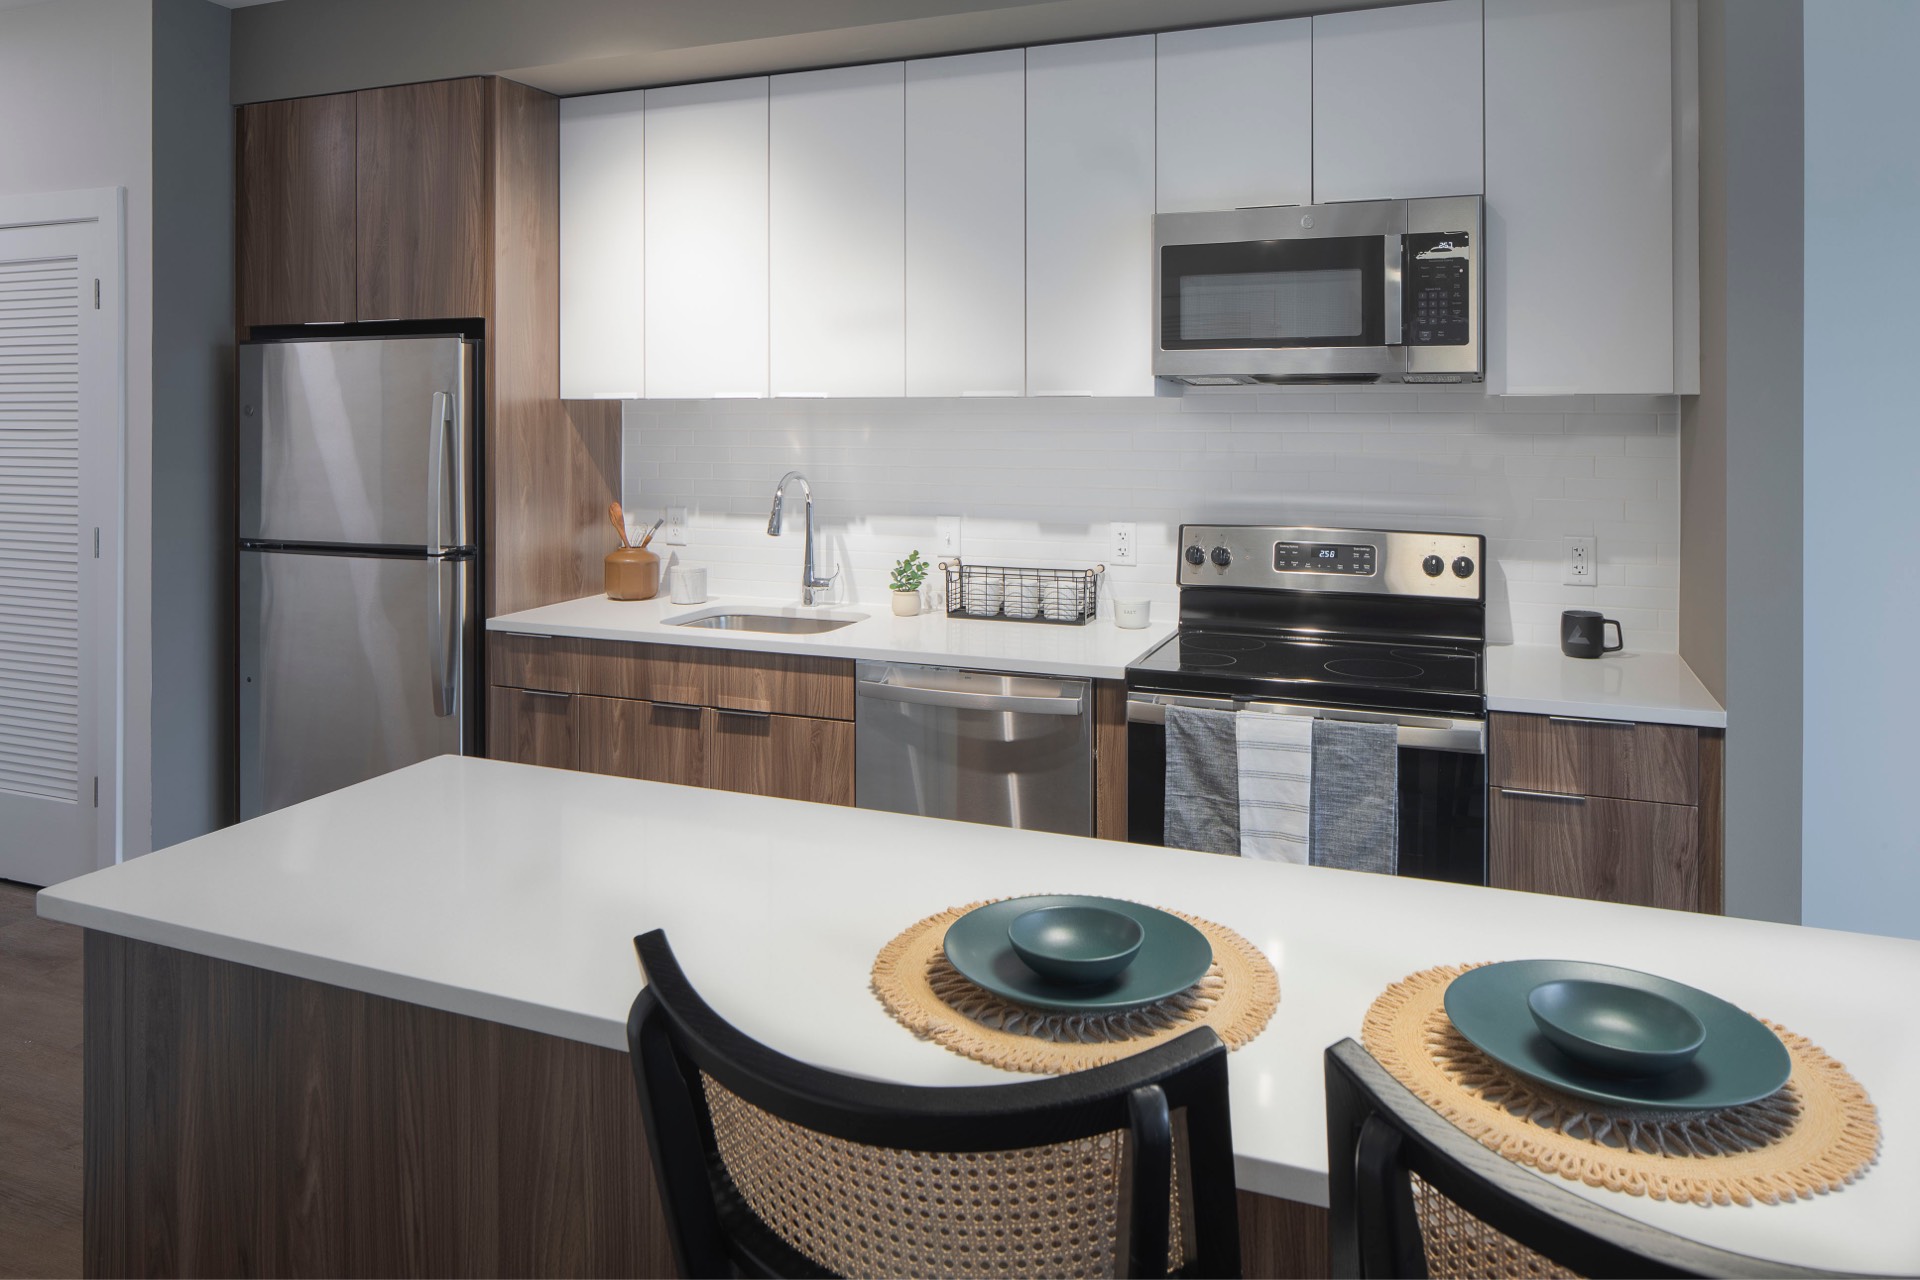 Apartment kitchen with island dining setting